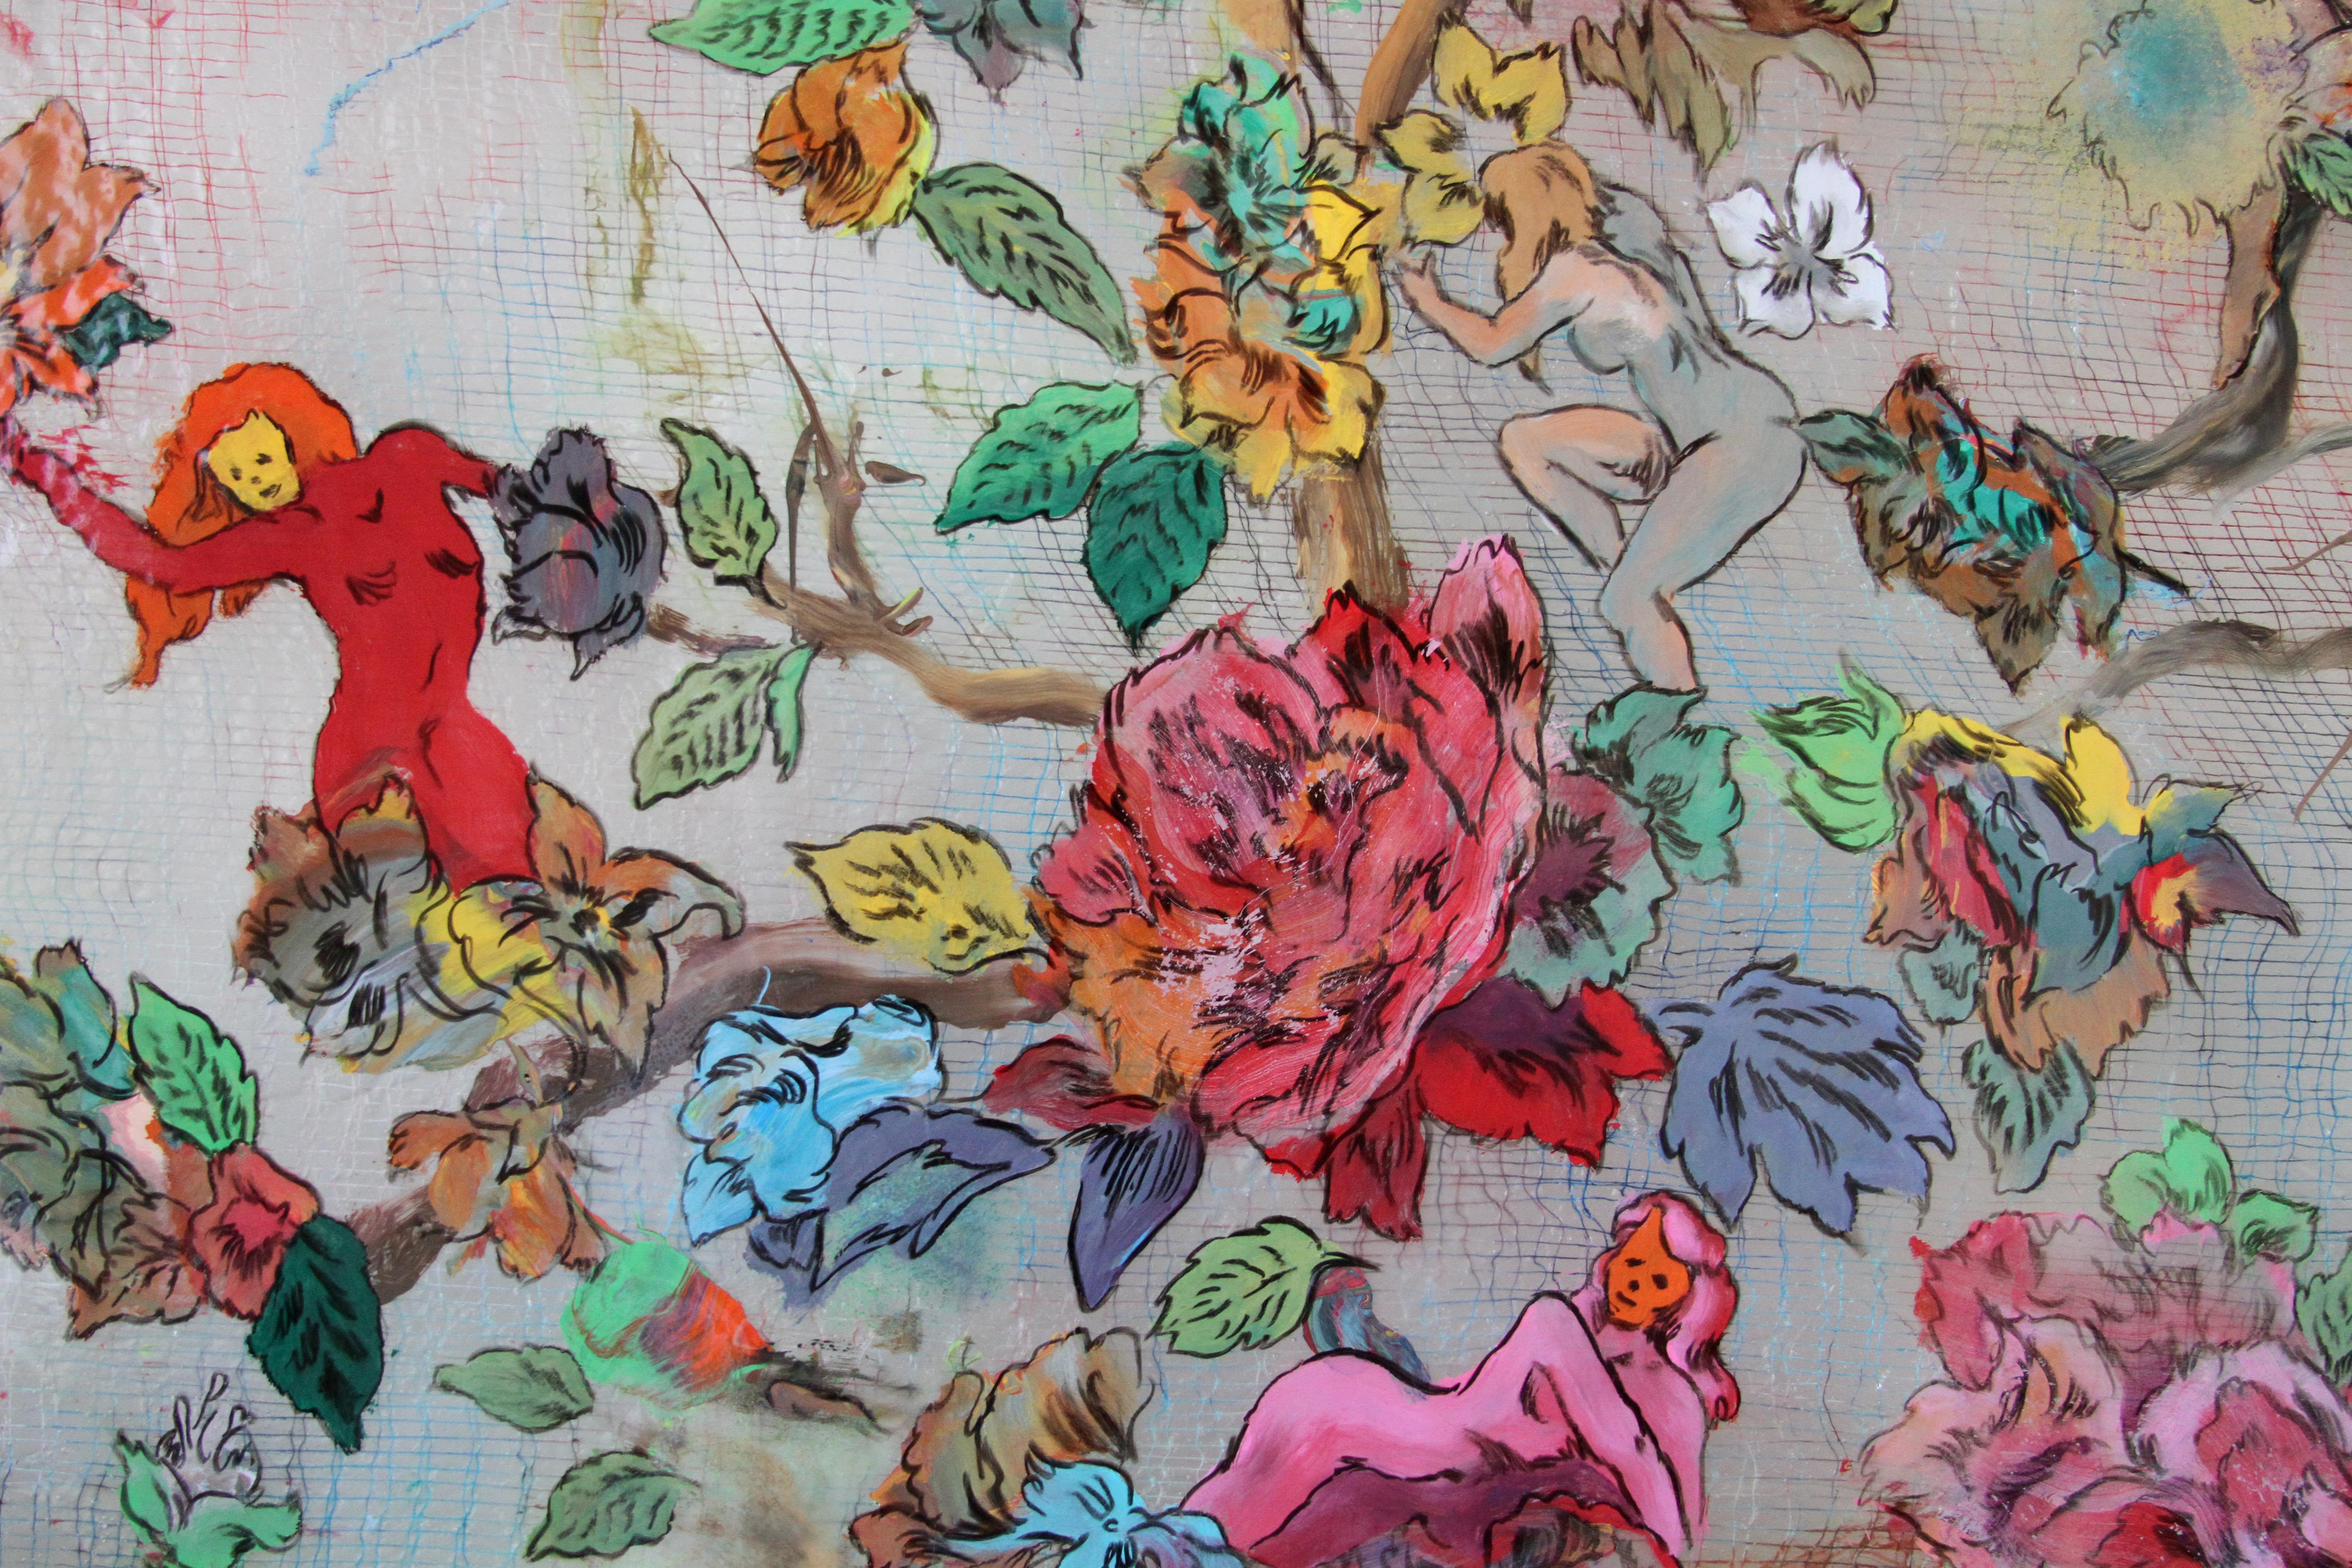 Hanging on the Vine - brightly colored floral design, ink on cheesecloth - Painting by Andrew LeMay Cox